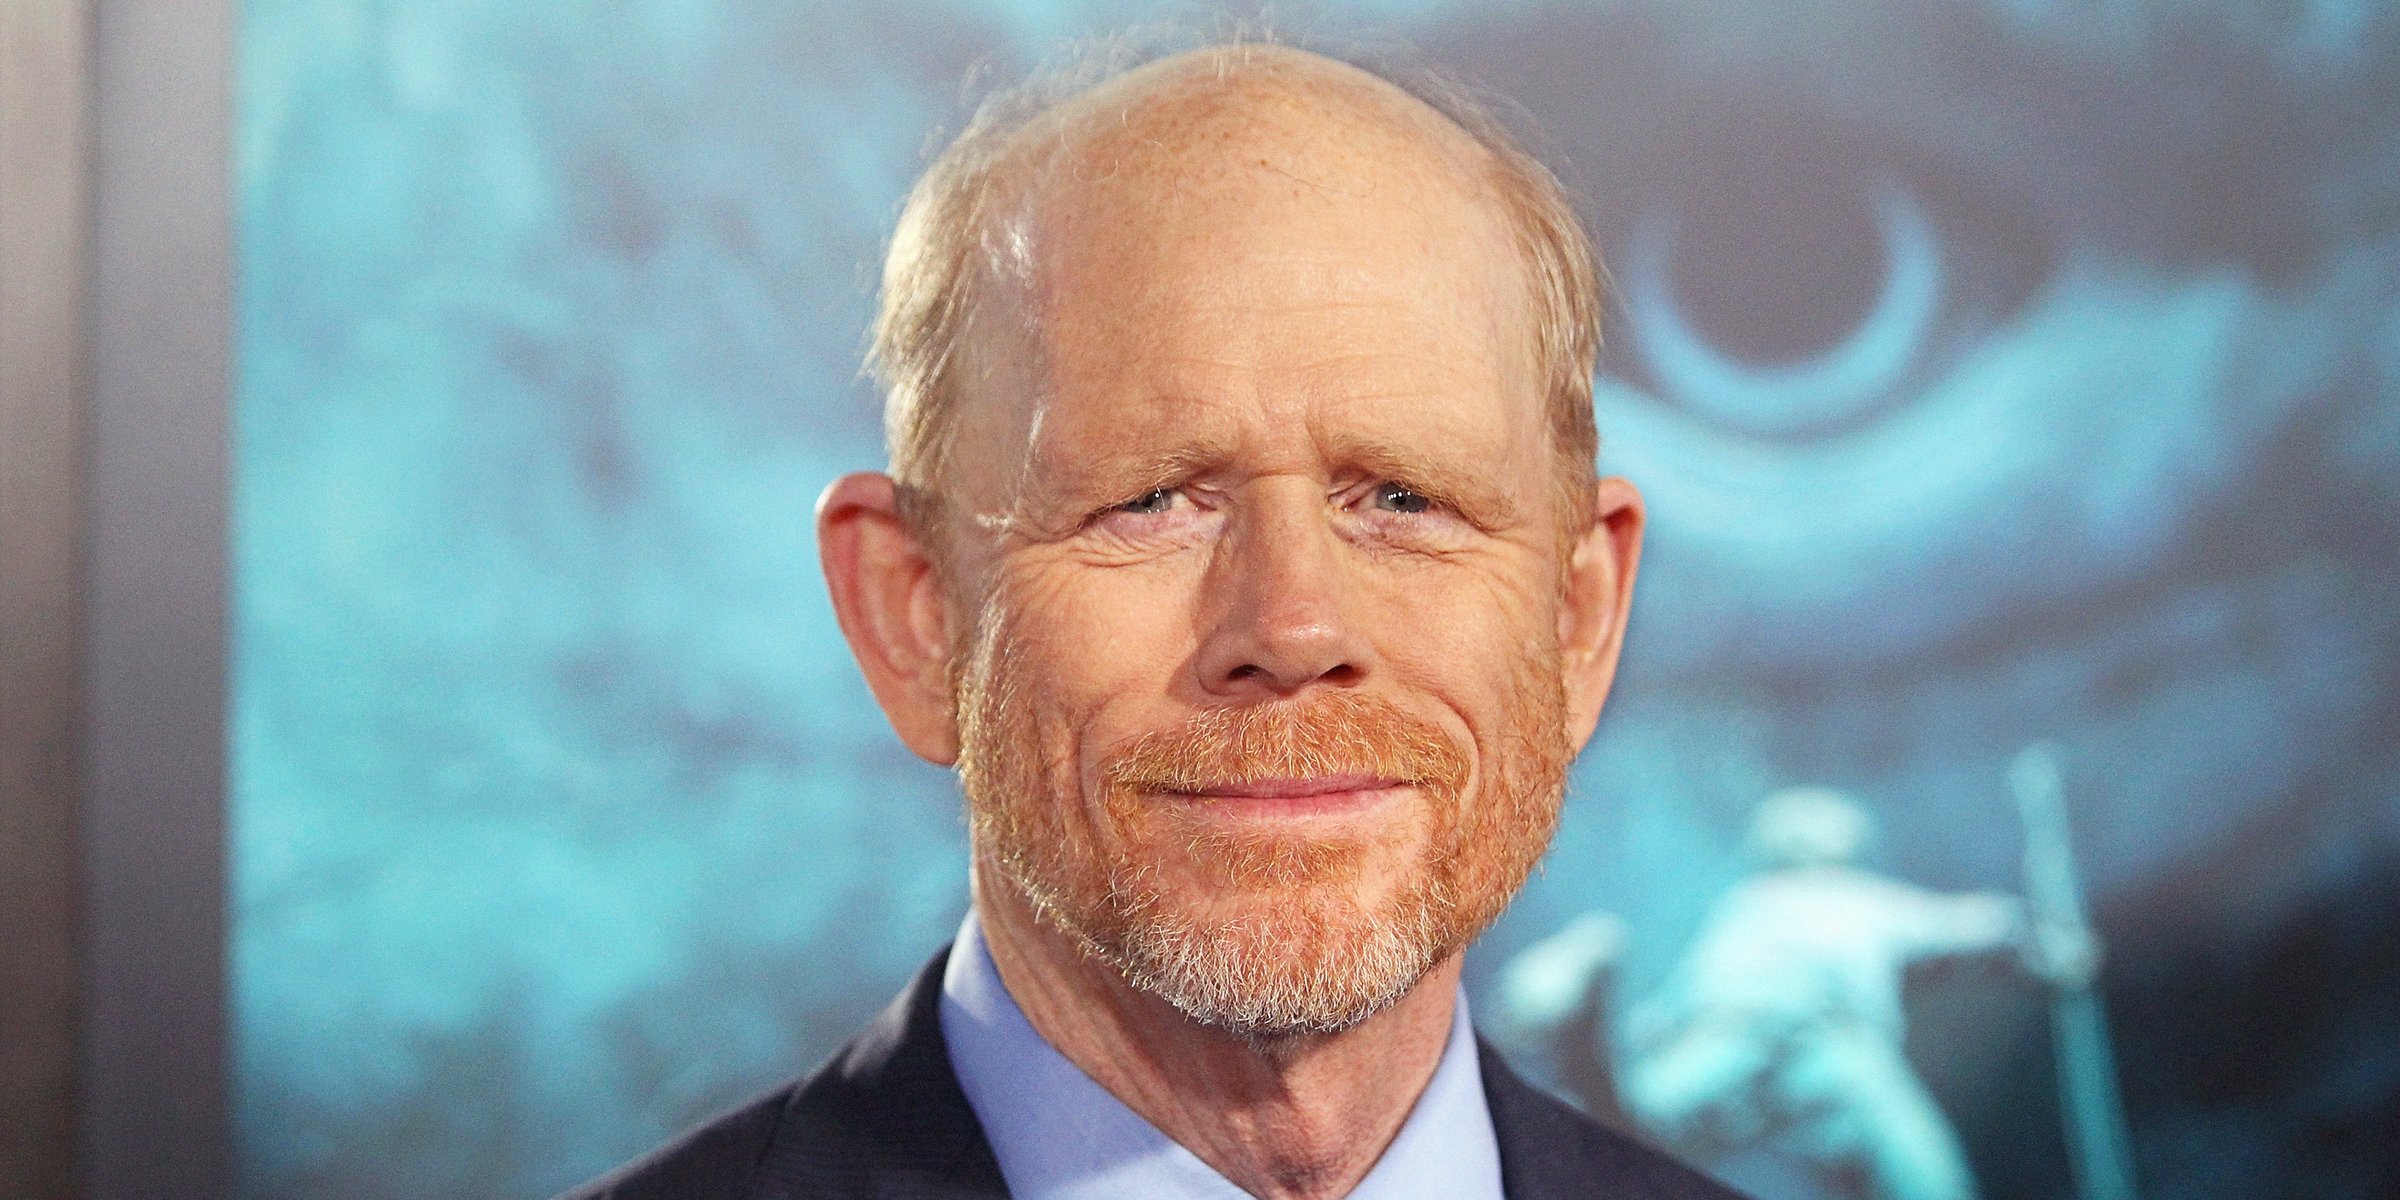 Ron Howard | Source: Getty Images